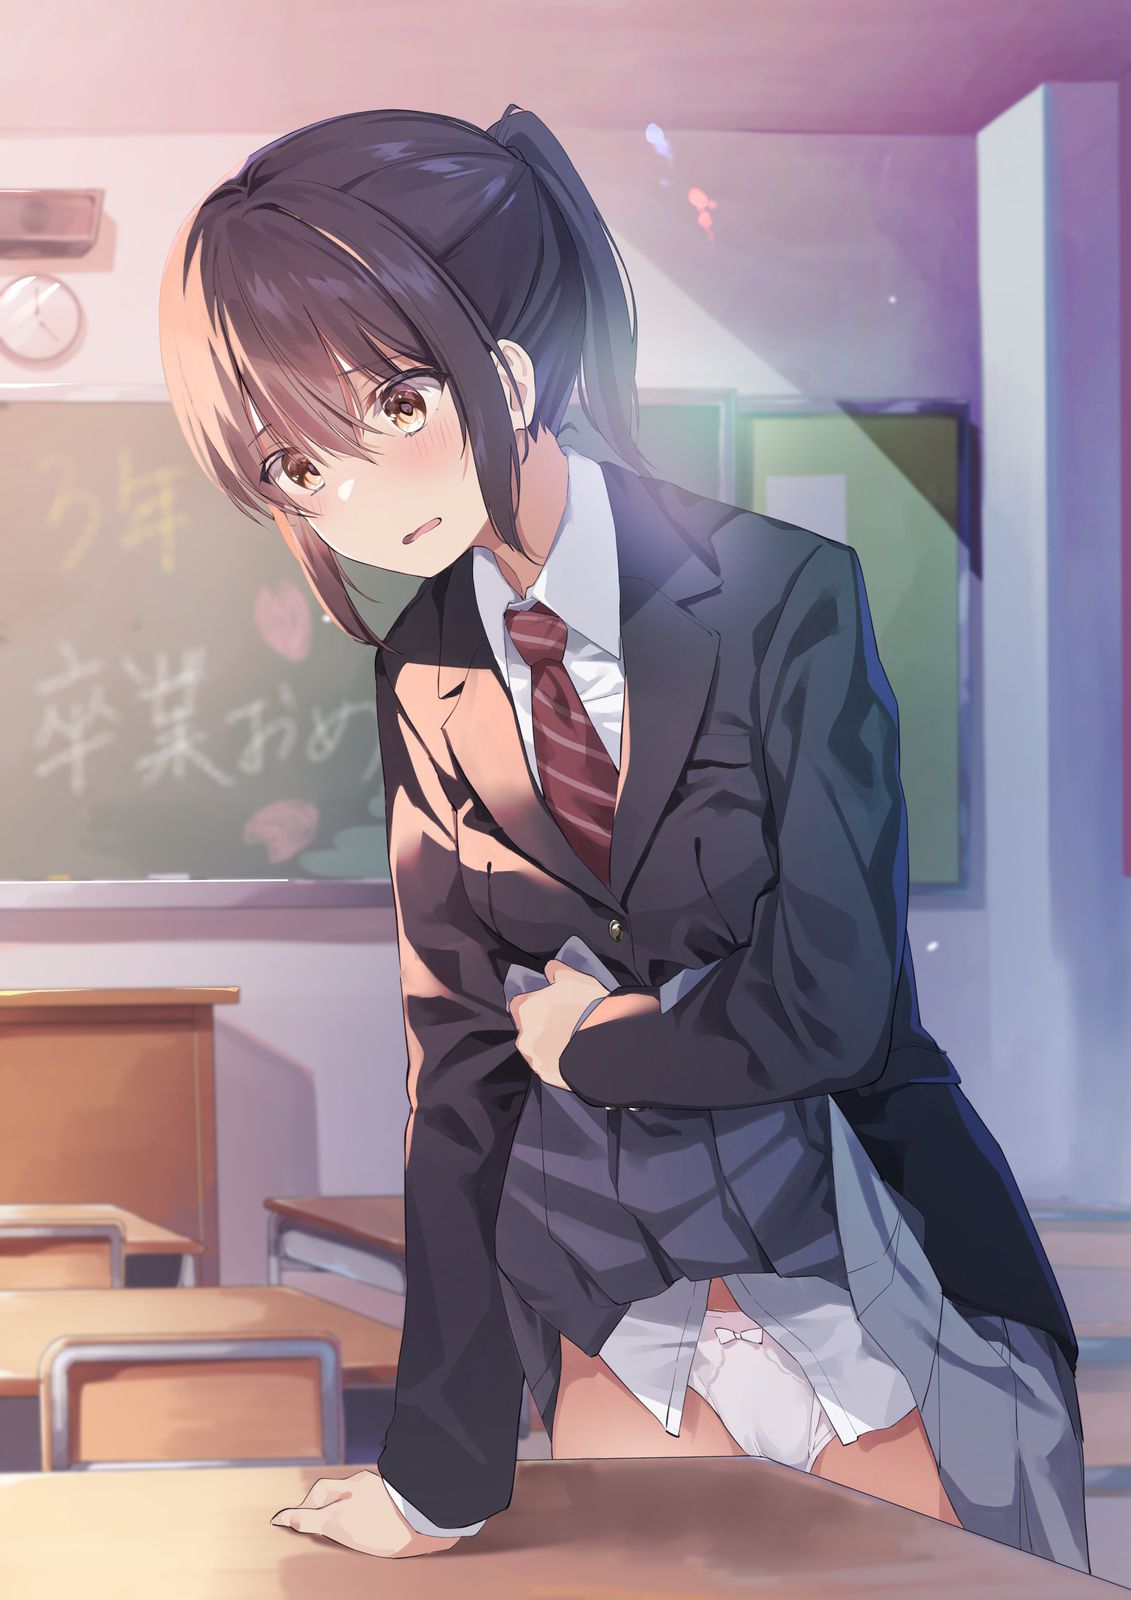 [Kaku Ona Lori Girl] Secondary erotic image of a secondary loli girl indulging in angular masturbation that she can't stand pressing her crotch against the desk 38